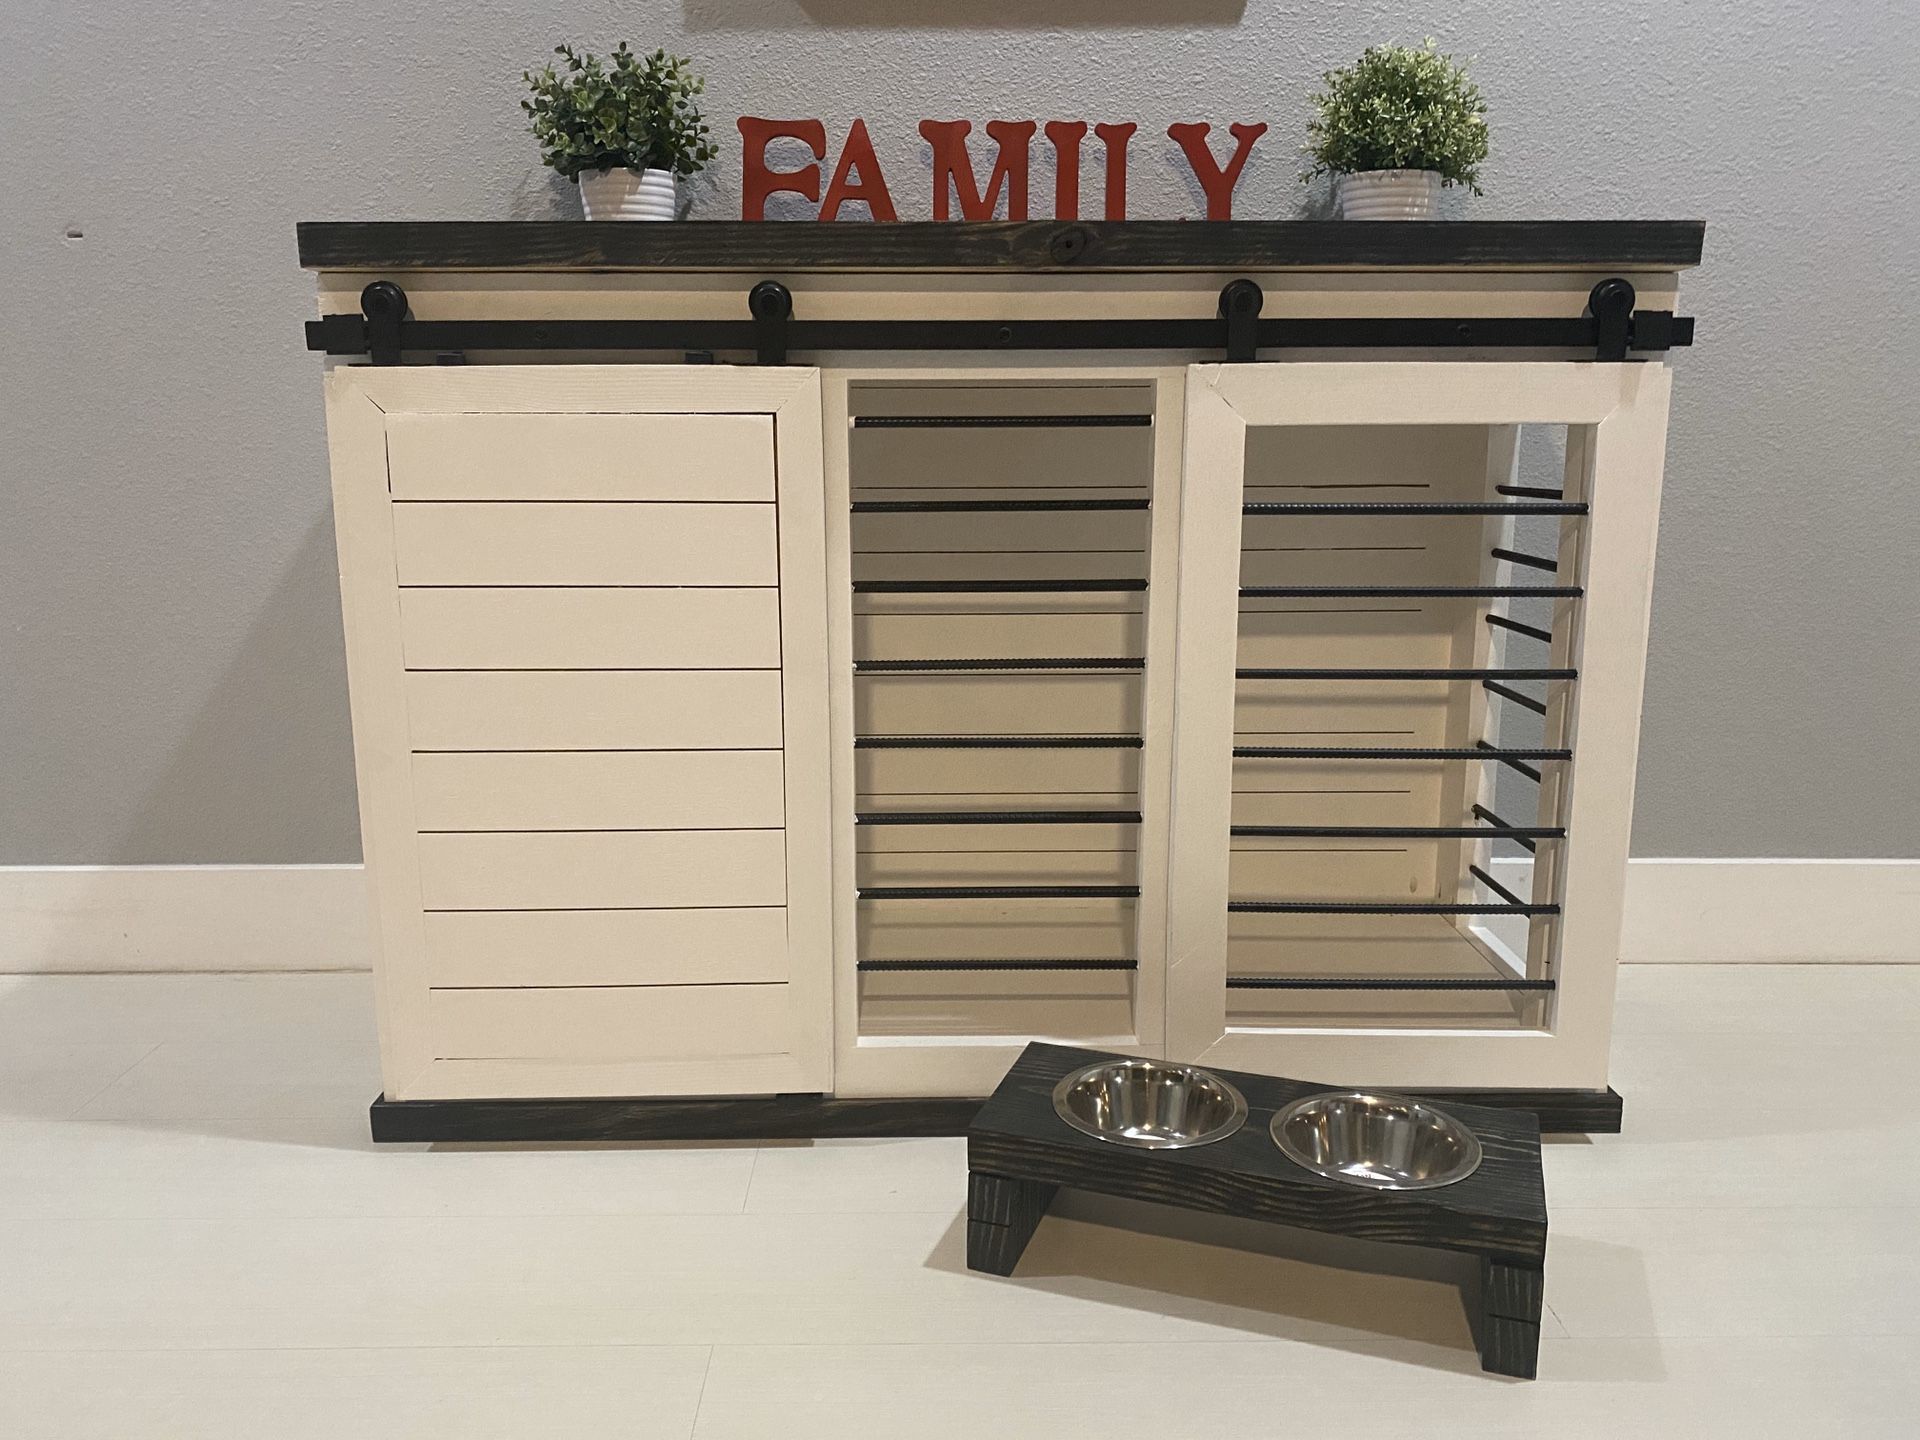 Farmhouse dog kennel / crate / tv stand